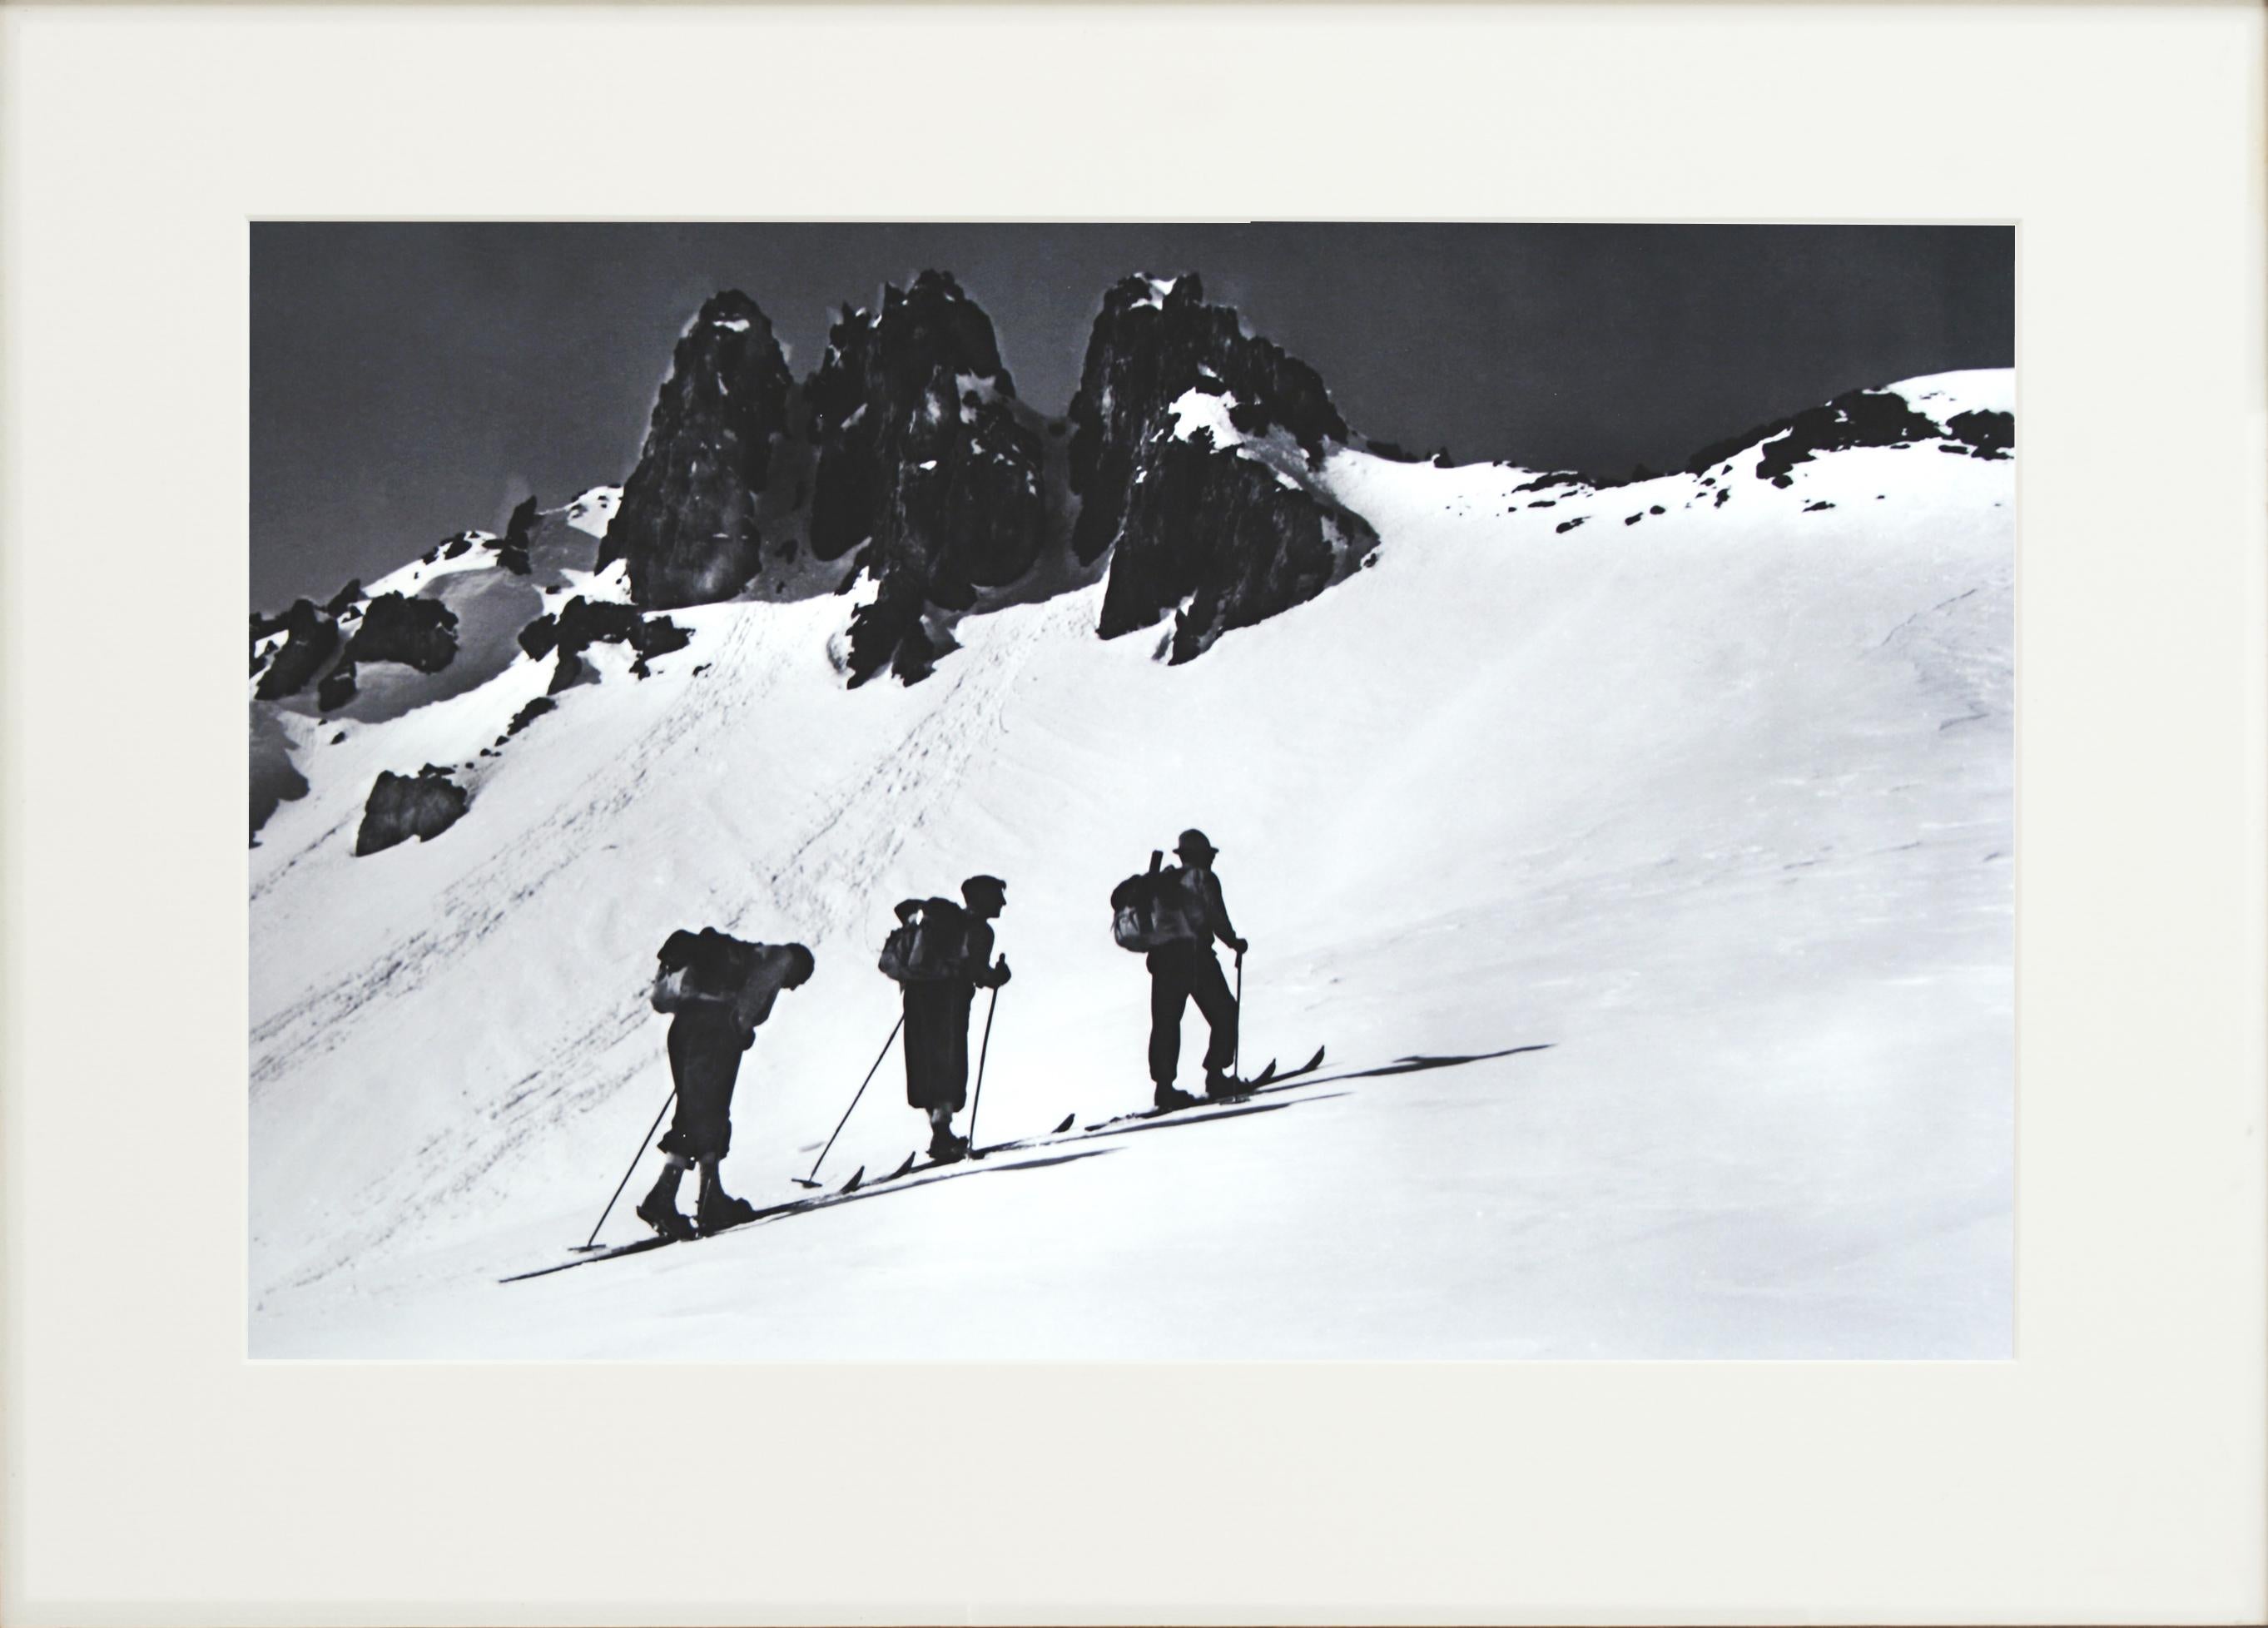 Vintage, Alpine Ski Photograph.
'Three Peaks', a new mounted black and white photographic image after an original 1930s skiing photograph. Black and white alpine photos are the perfect addition to any home or ski lodge, so please do check out our